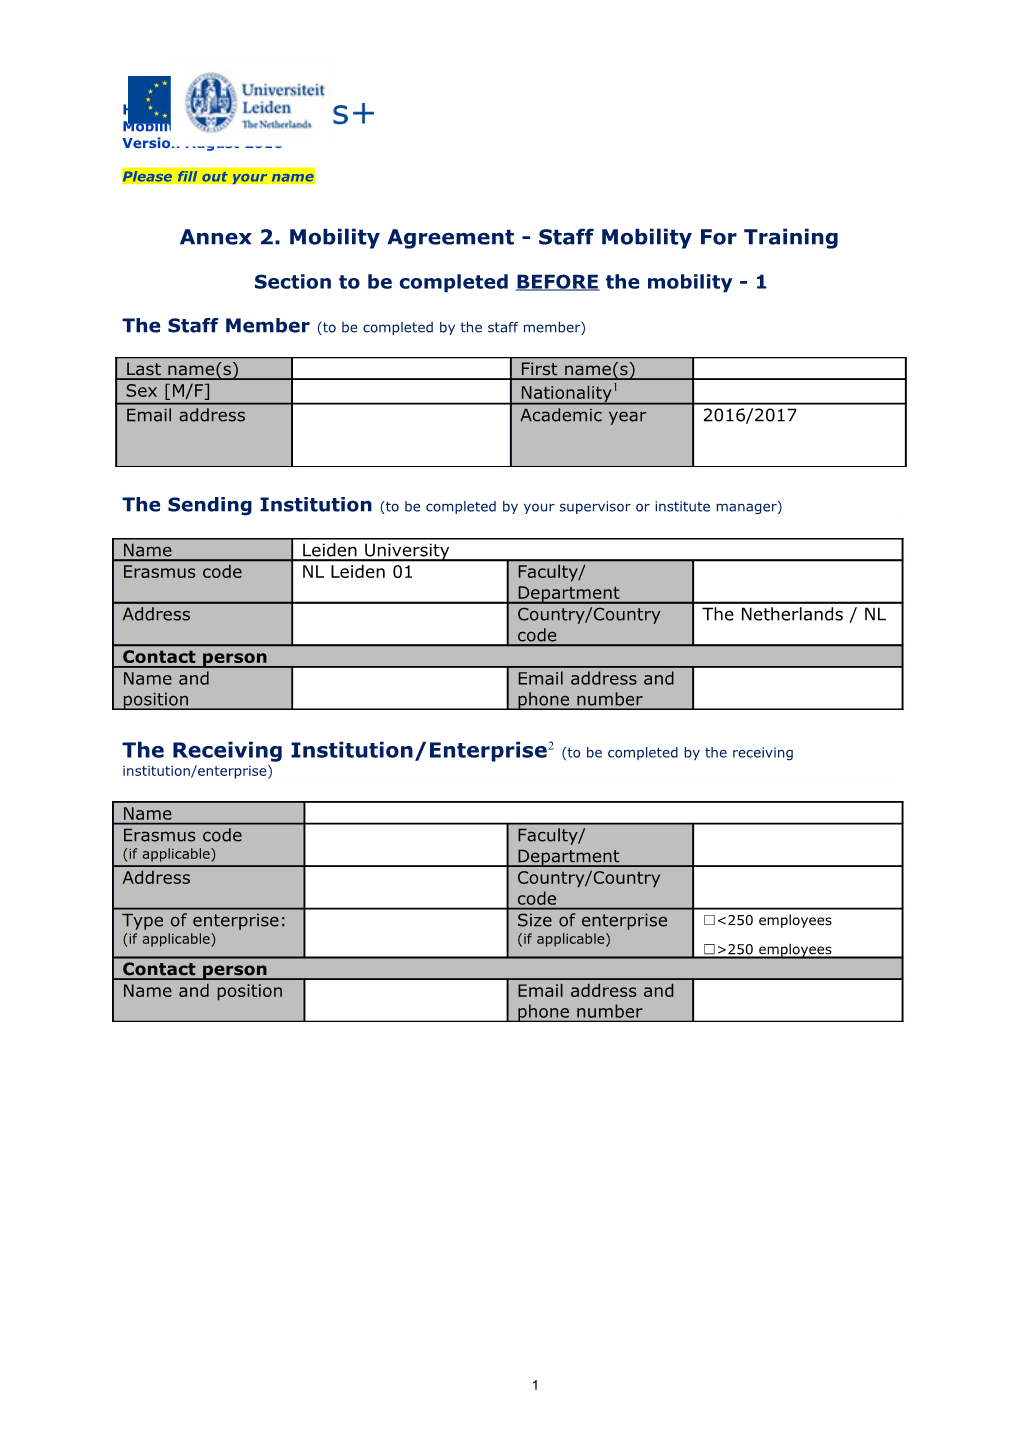 Annex 2. Mobility Agreement - Staff Mobility for Training